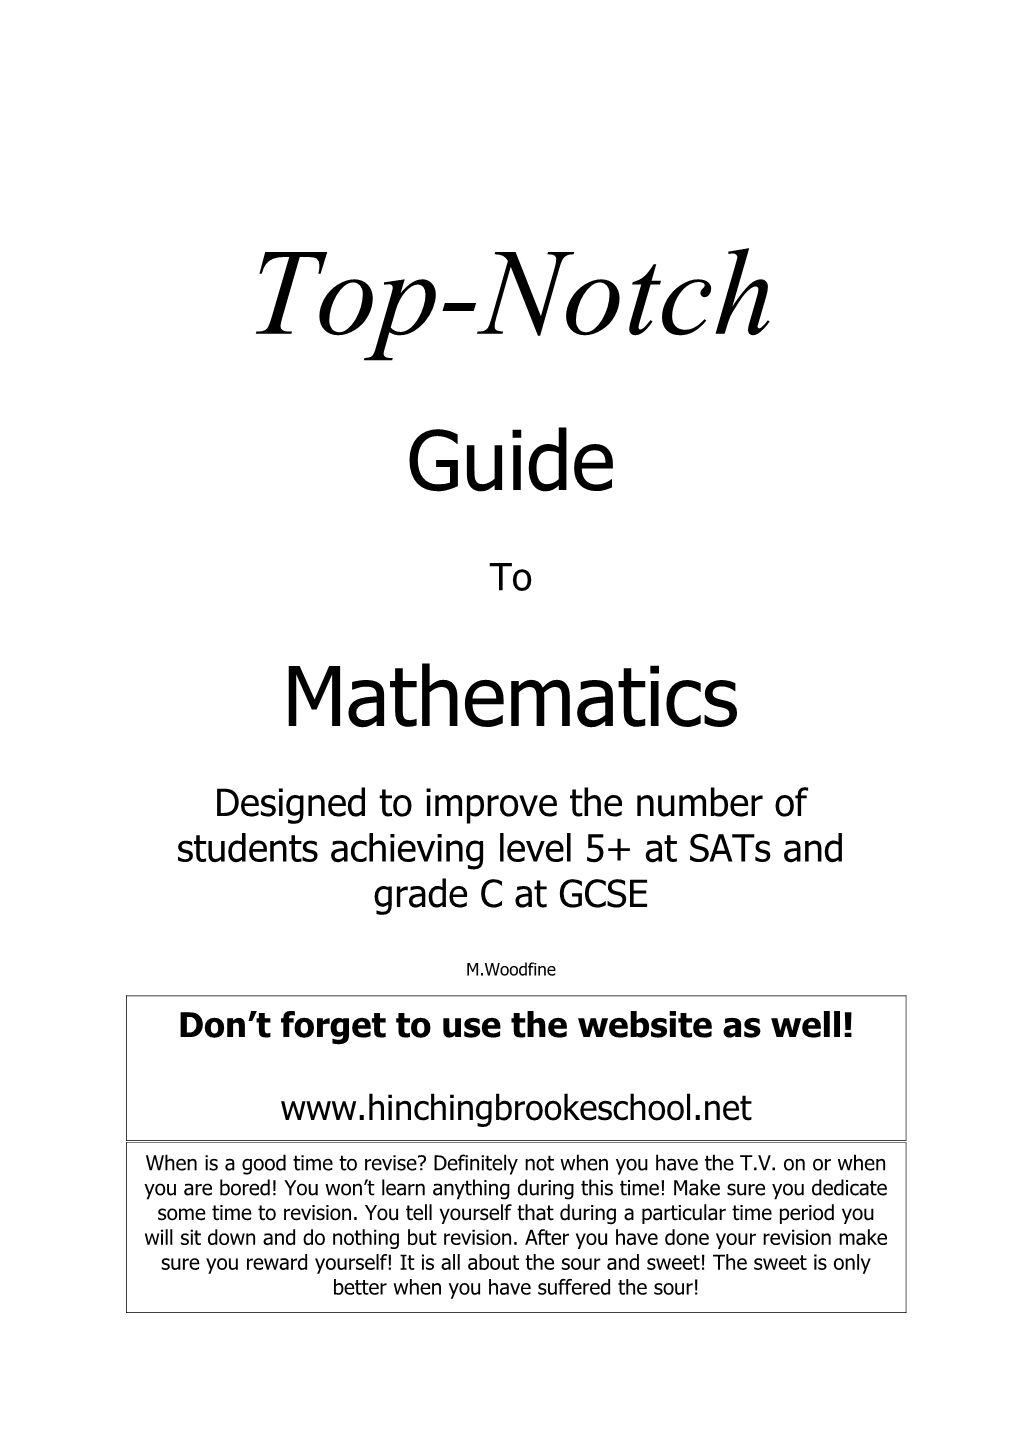 Designed to Improve the Number of Students Achieving Level 5+ at Sats and Grade C at GCSE